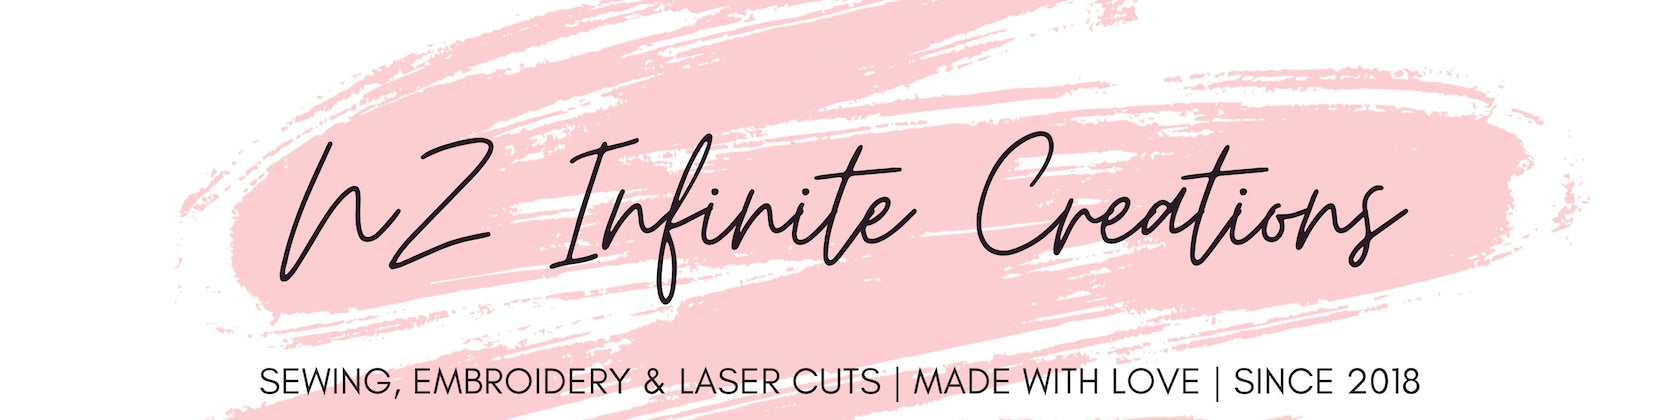 NZ Infinite Creations Logo- Customizes in sewing, embroidery, and laser cut. Made with love since 2018.